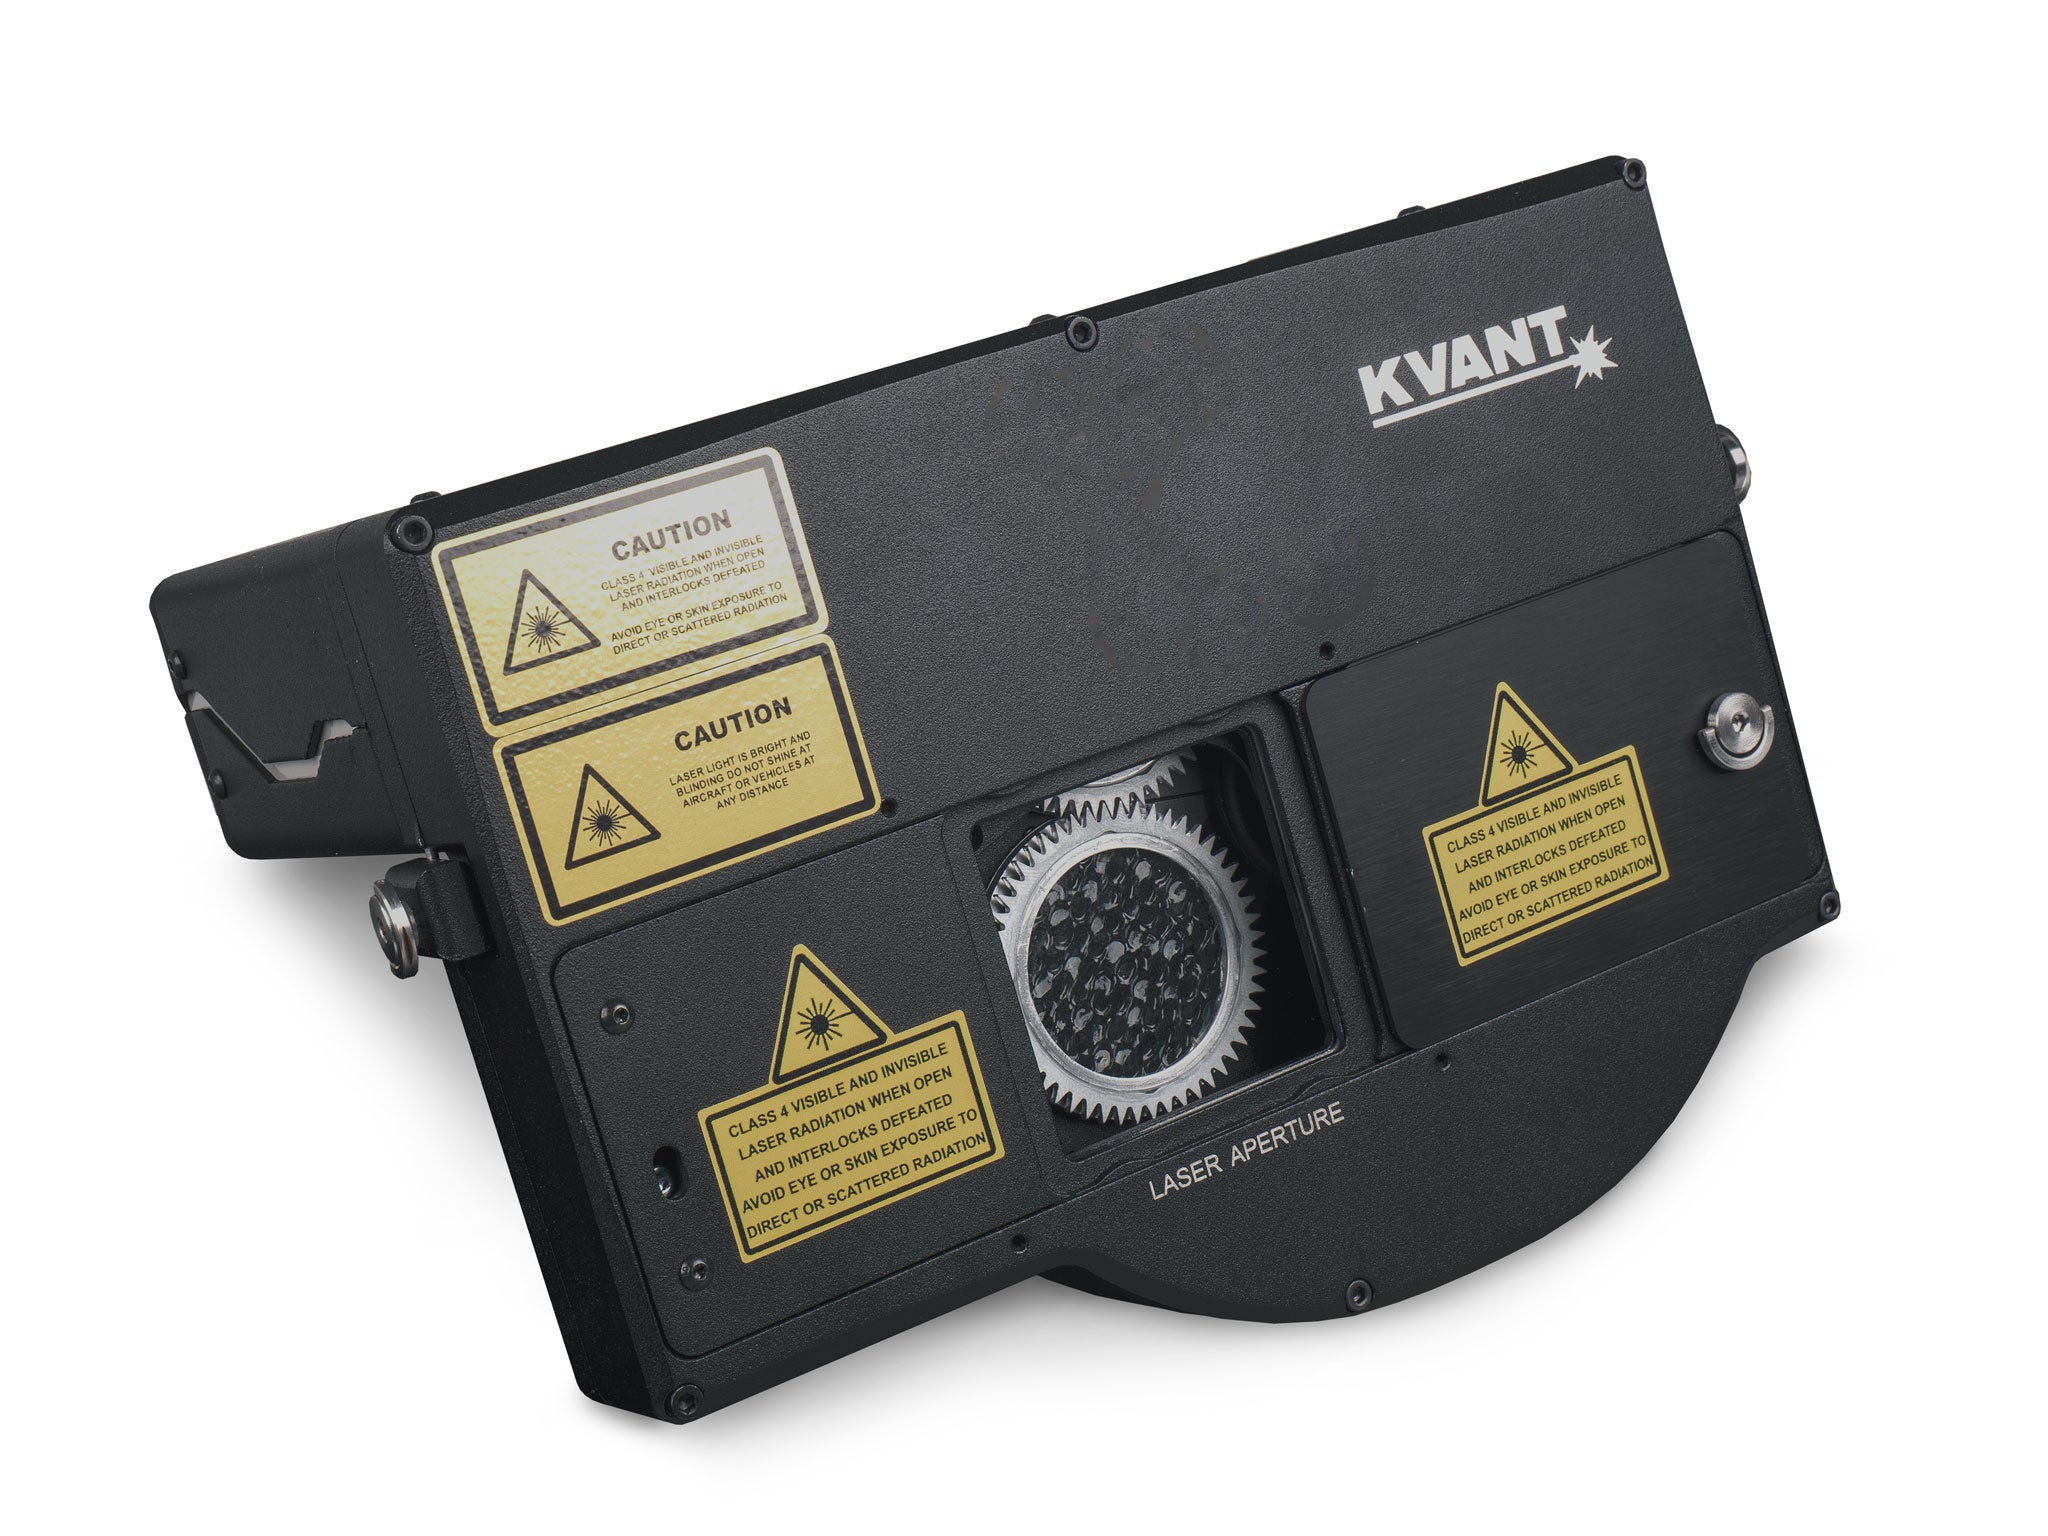 Dj laser light for the best disco show – Kvant Lasers, s.r.o.